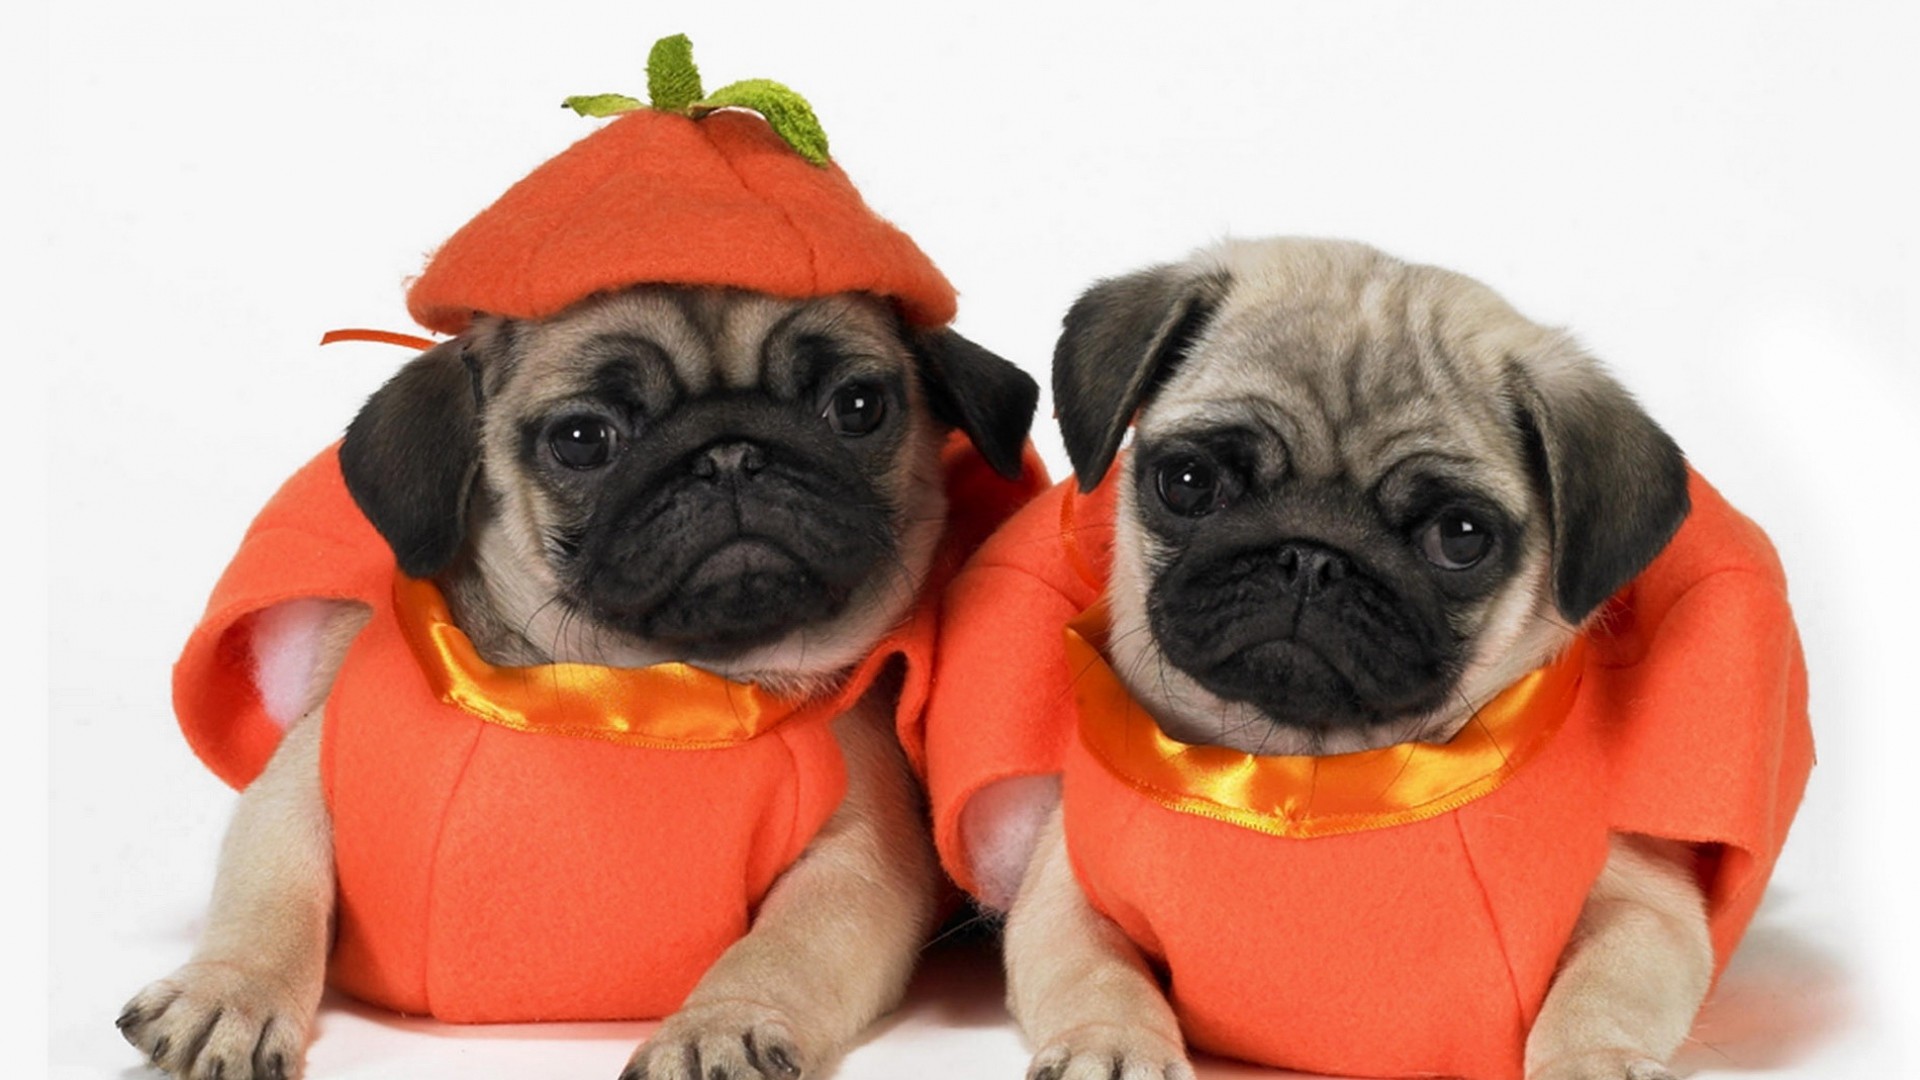 1920x1080 Get the latest pugs, dogs, puppies news, pictures and videos and learn all  about pugs, dogs, puppies from wallpapers4u.org, your wallpaper news source.